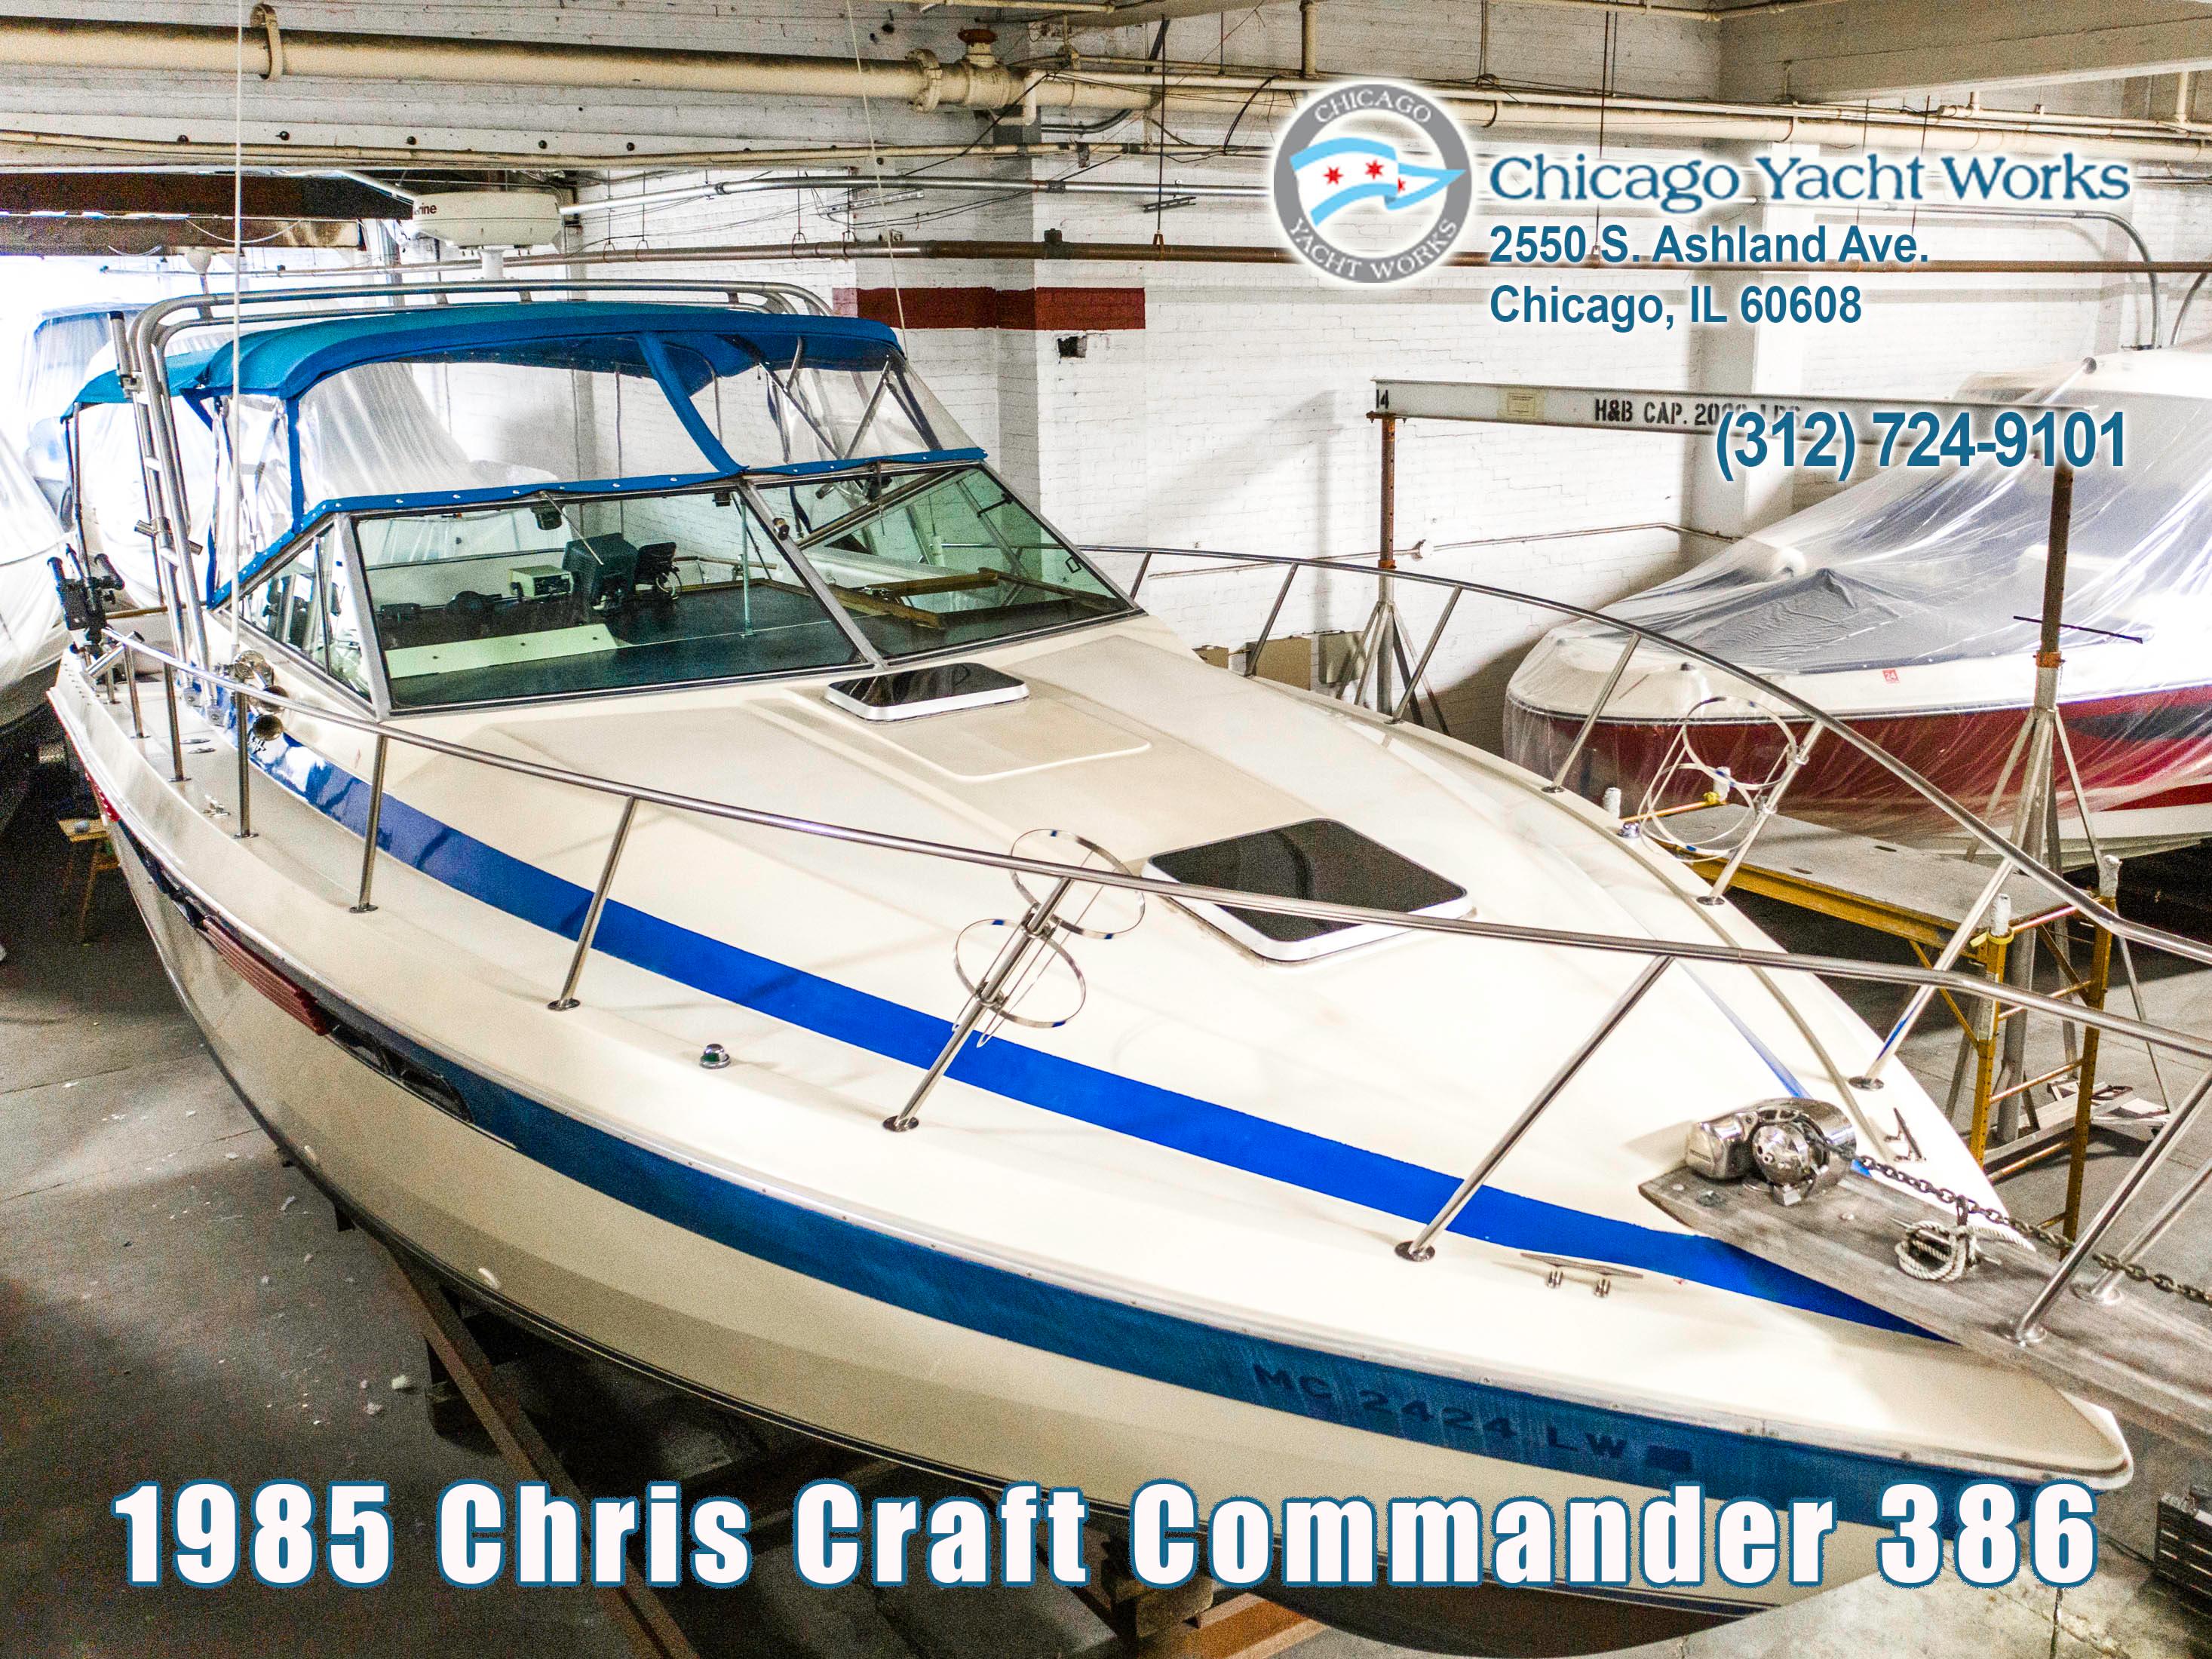 chicago yacht works reviews